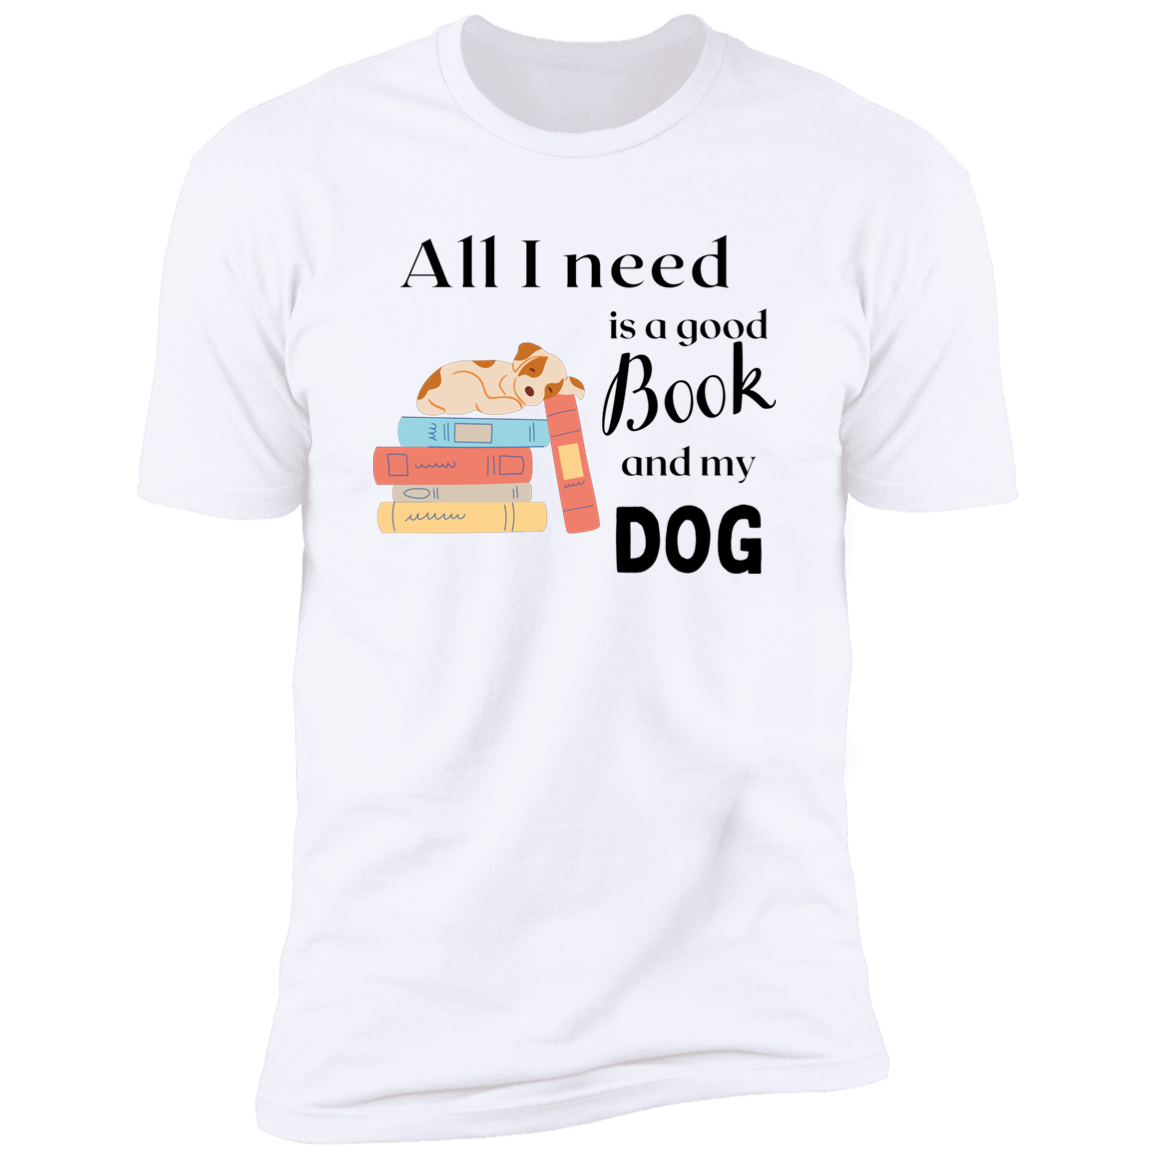 All I Need is a Good Book and My Dog, dog t-shirt for humans, in white